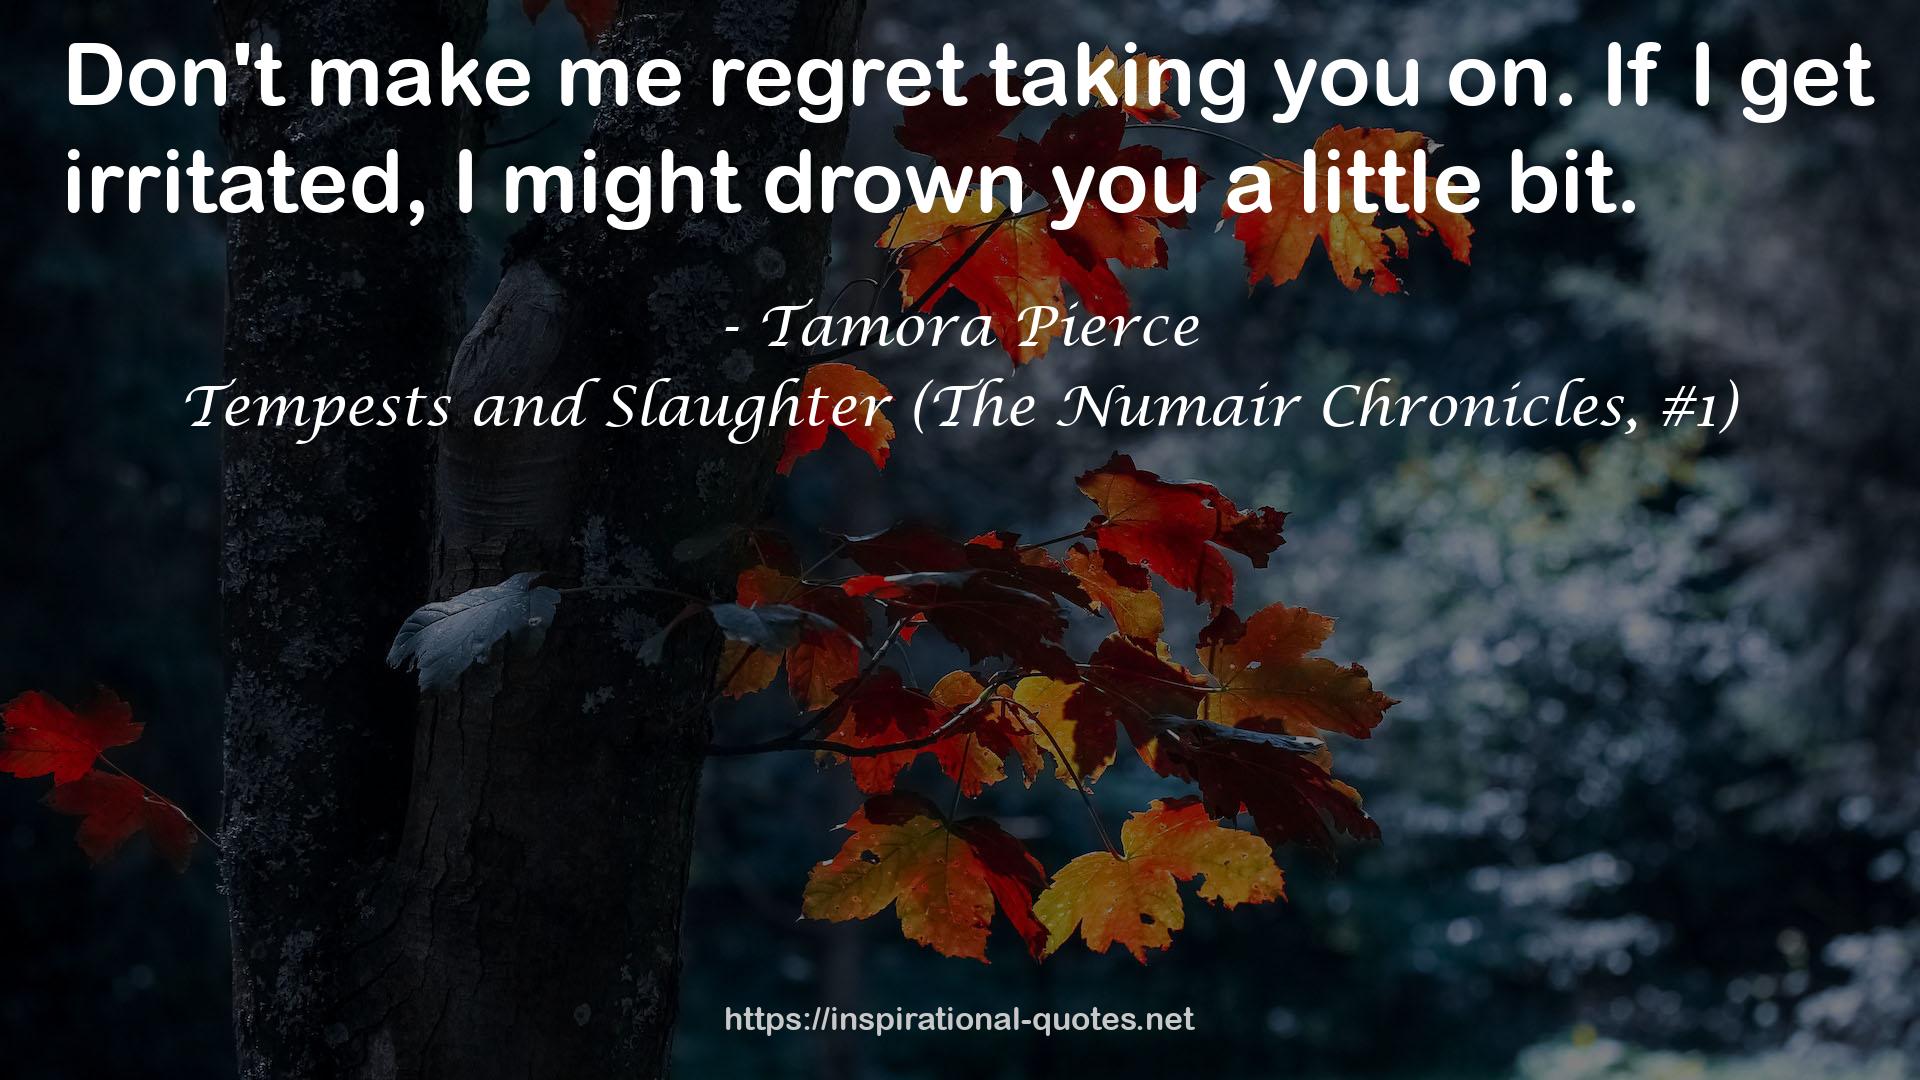 Tempests and Slaughter (The Numair Chronicles, #1) QUOTES